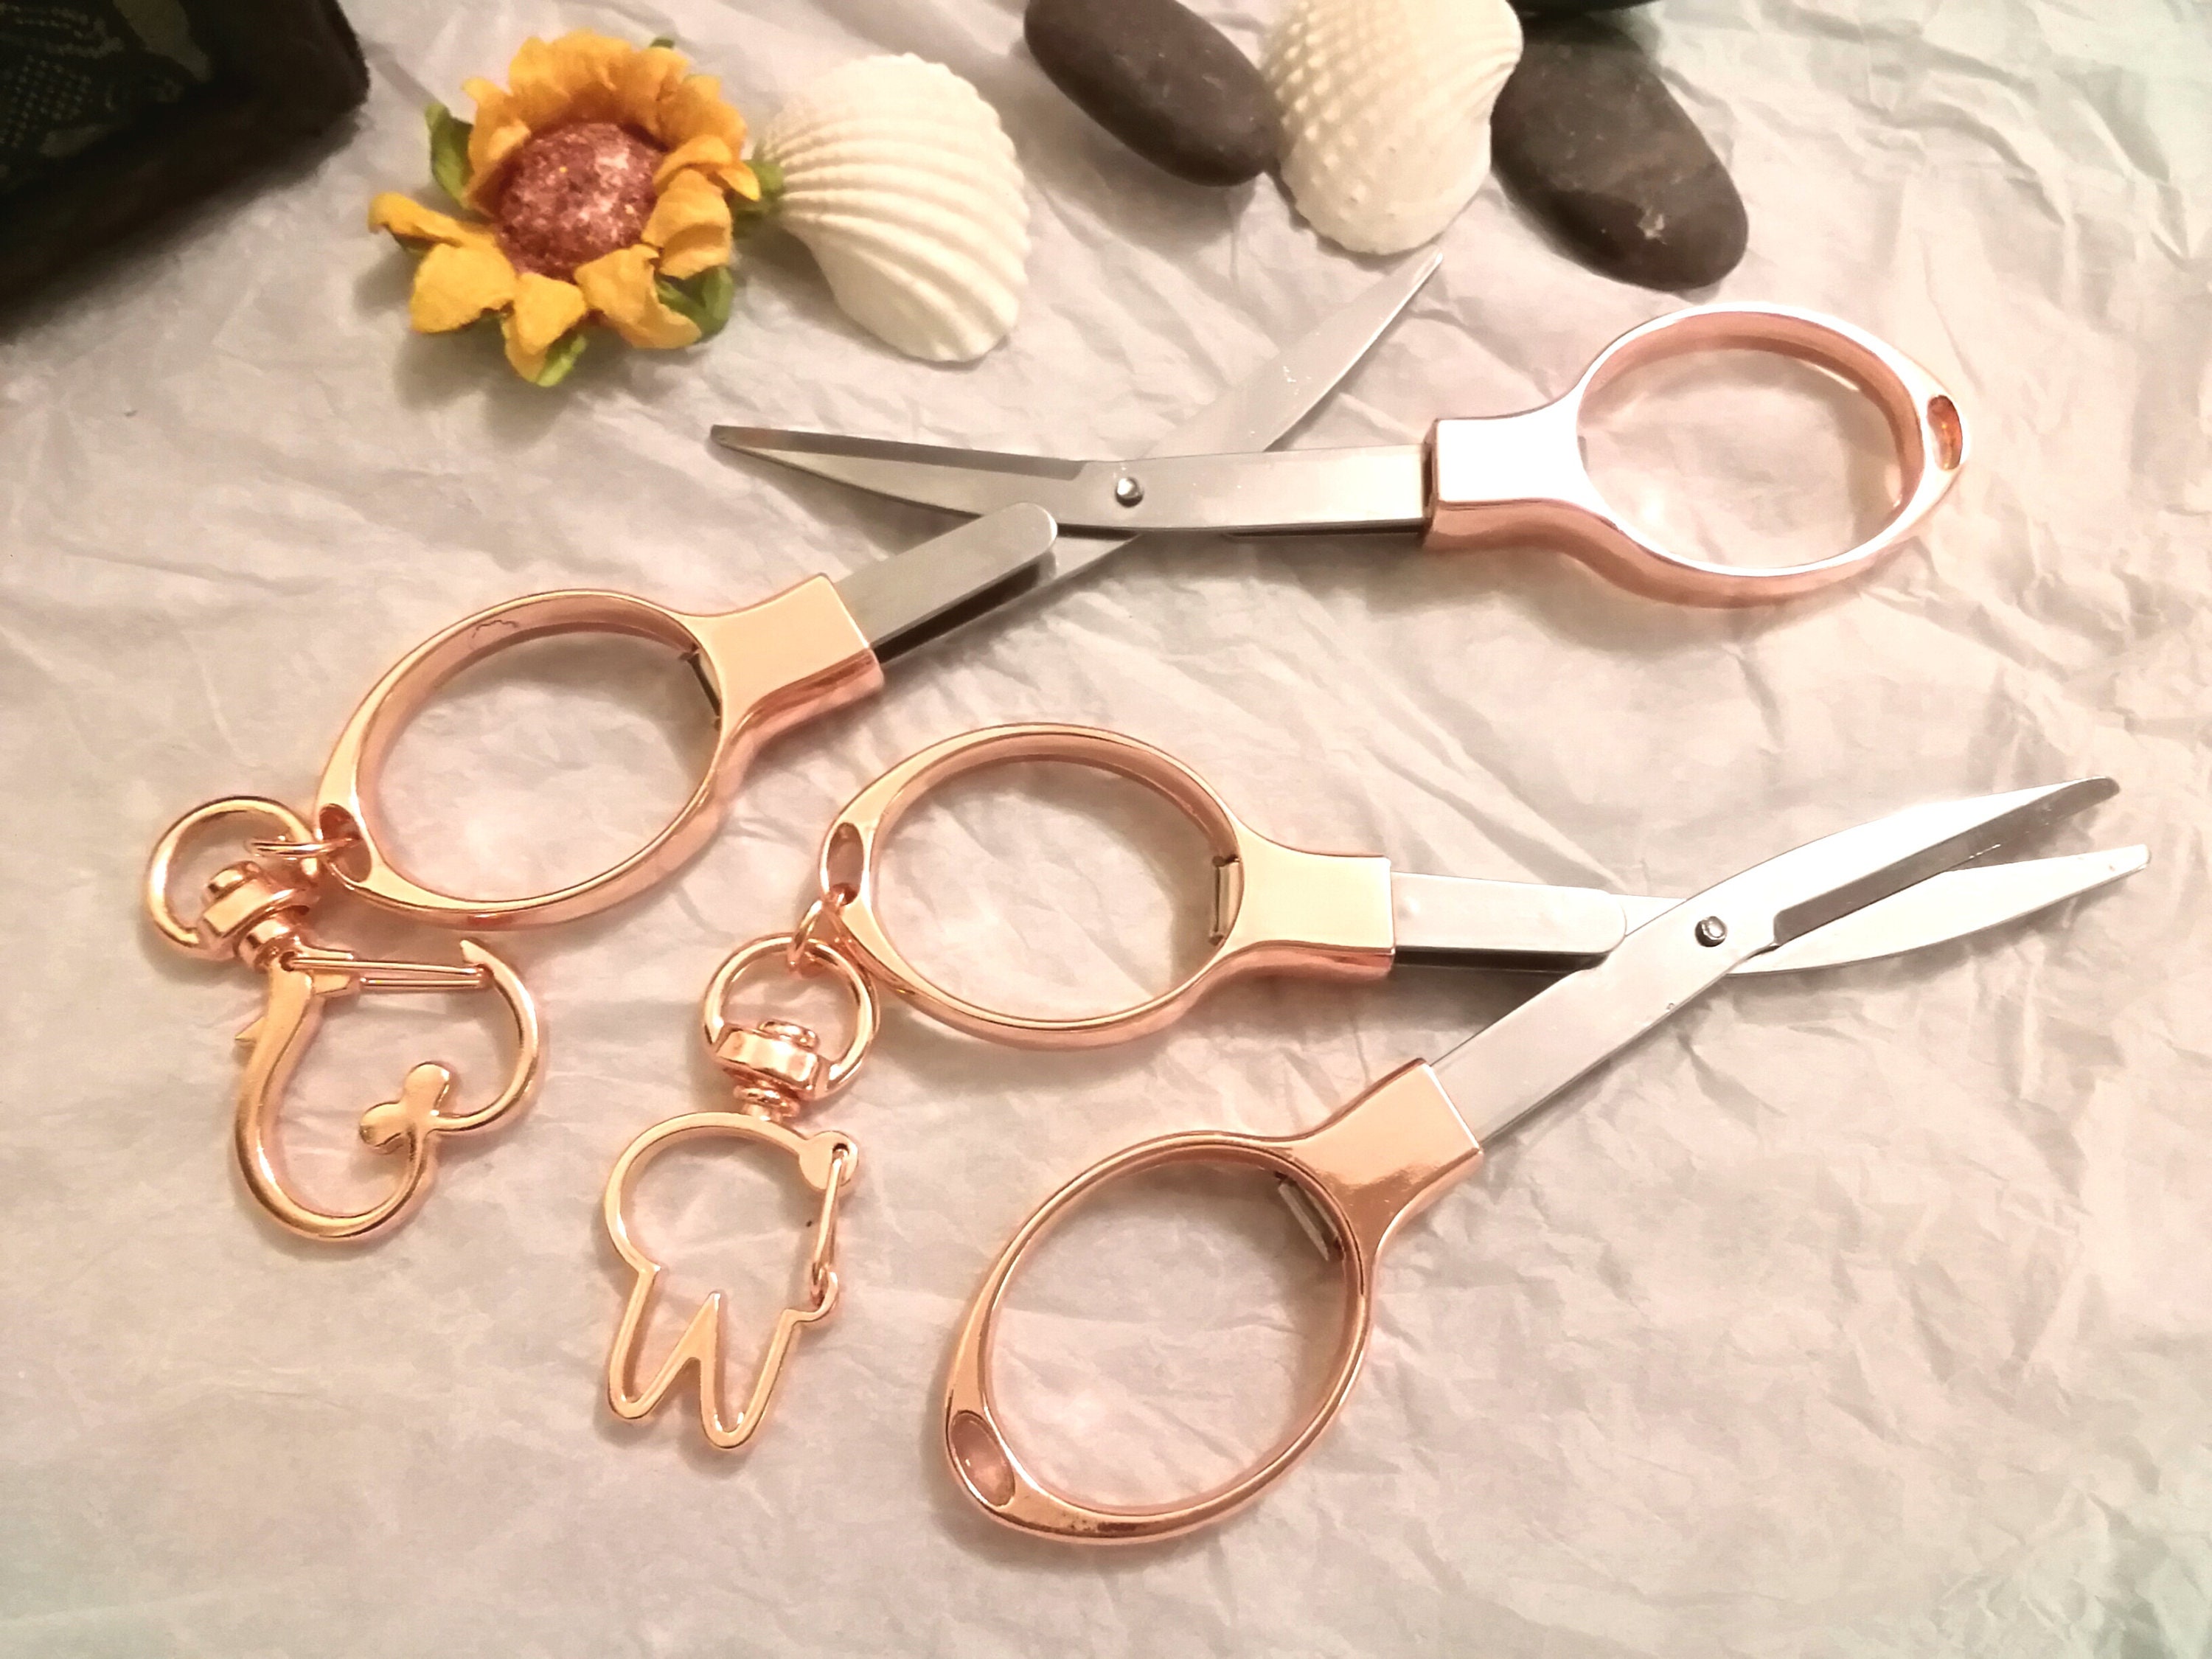 2Pcs Mini Scissors,Foldable Scissors Stainless,Travel Scissors for Can Hang  on Your Key Chain,for Craft, Camping, Outdoors